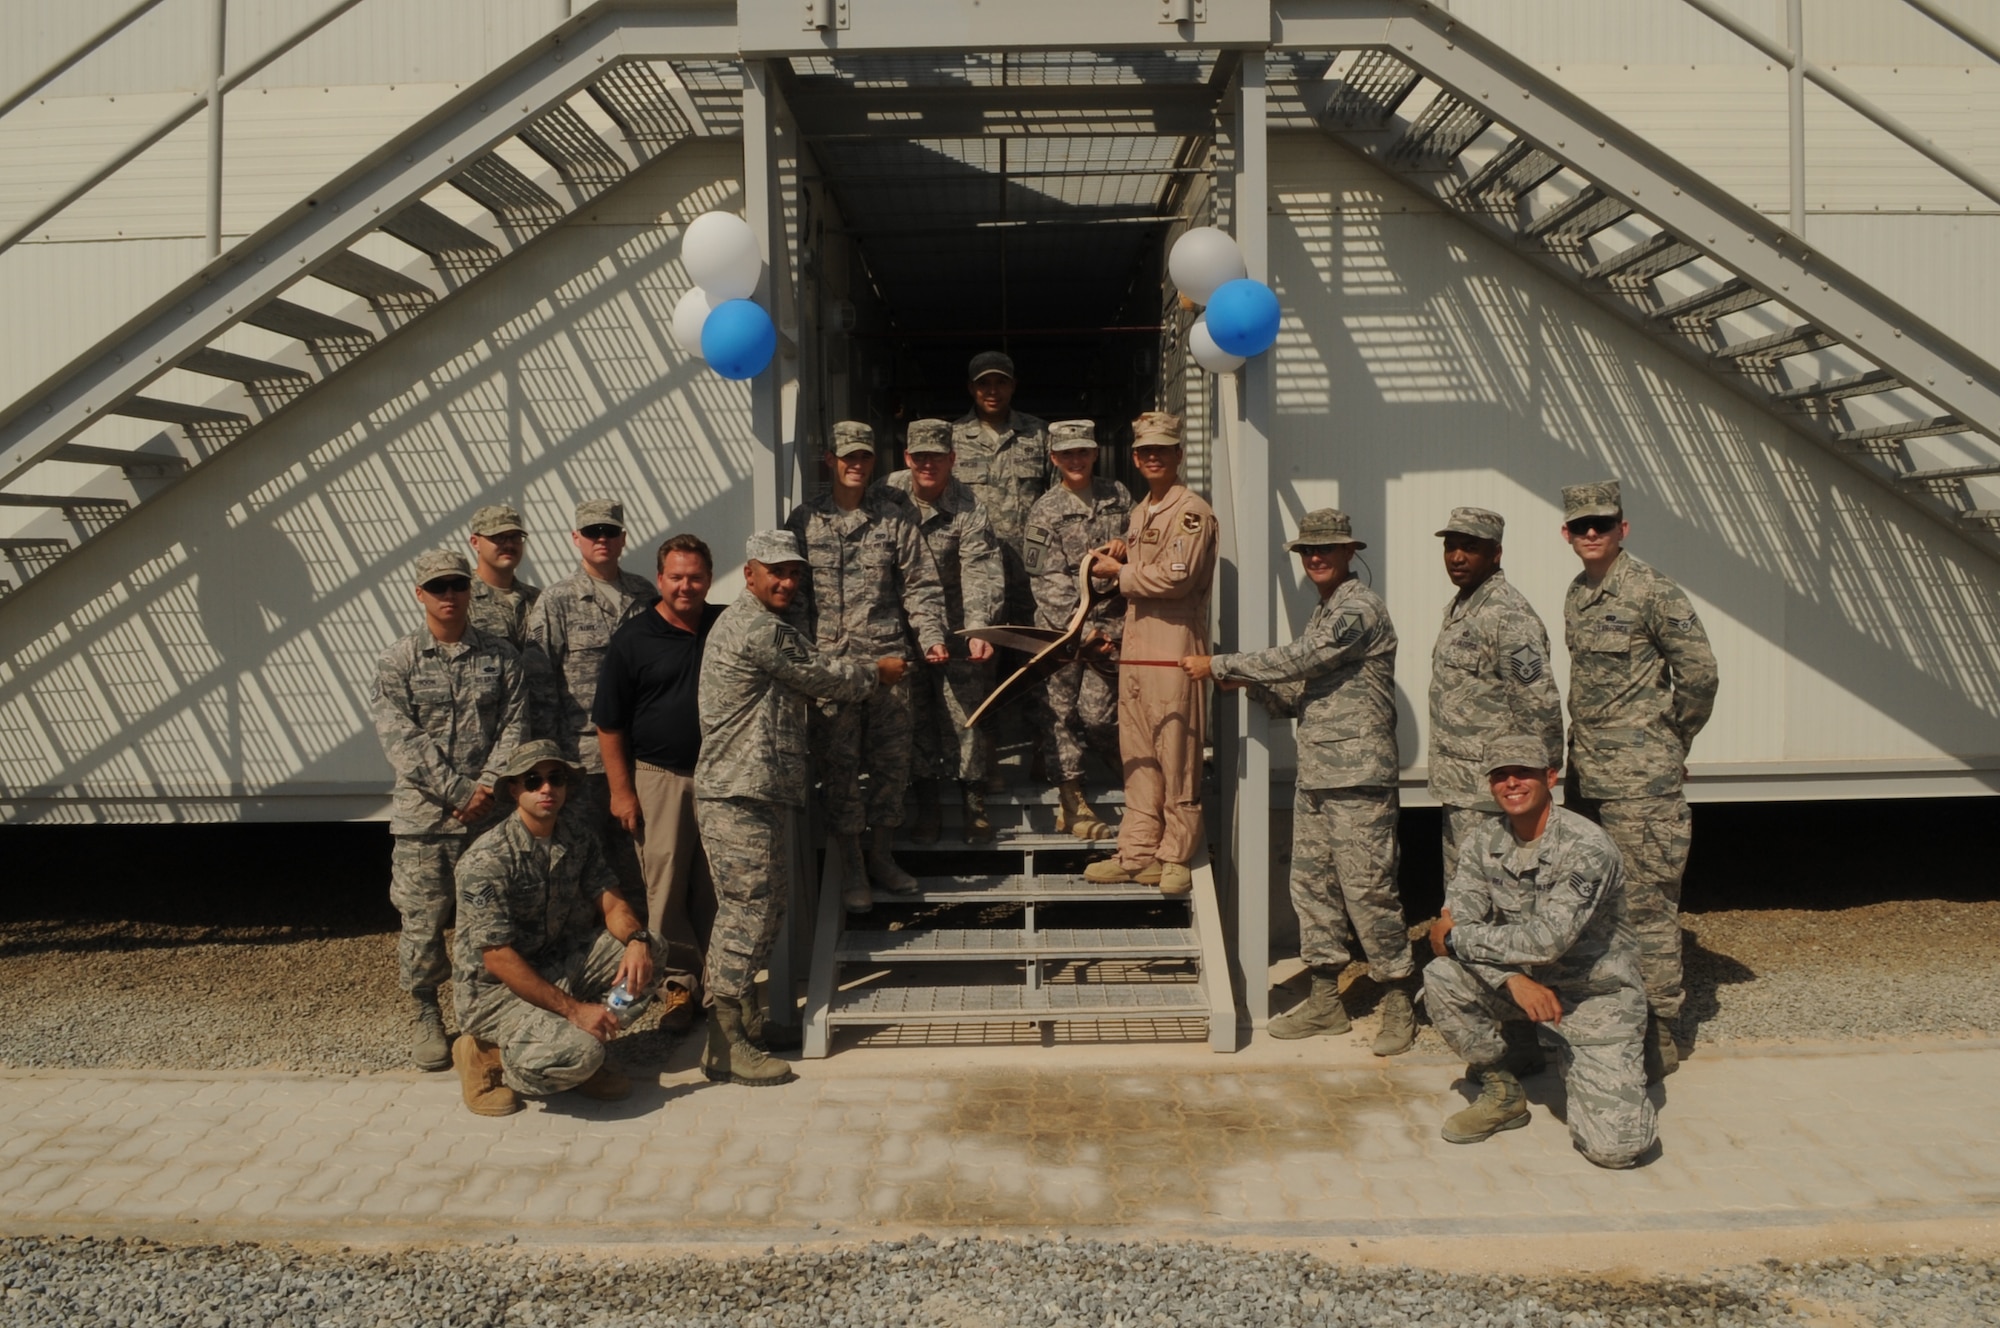 Members of the Air Expeditionary Wing stand with 
Brig. Gen. John T. Quintas, Air Expeditionary Wing commander, Chief Master Sgt. Samer Alkhoury, AEW command chief, and members of the AEW team prepare to cut the ribbon at the grand opening ceremony of the new re-locatable billets Oct. 13, 2014, at an undisclosed location in Southwest Asia.  (U.S. Air Force photo by Senior Master Sgt. Carrie Hinson/Released)
